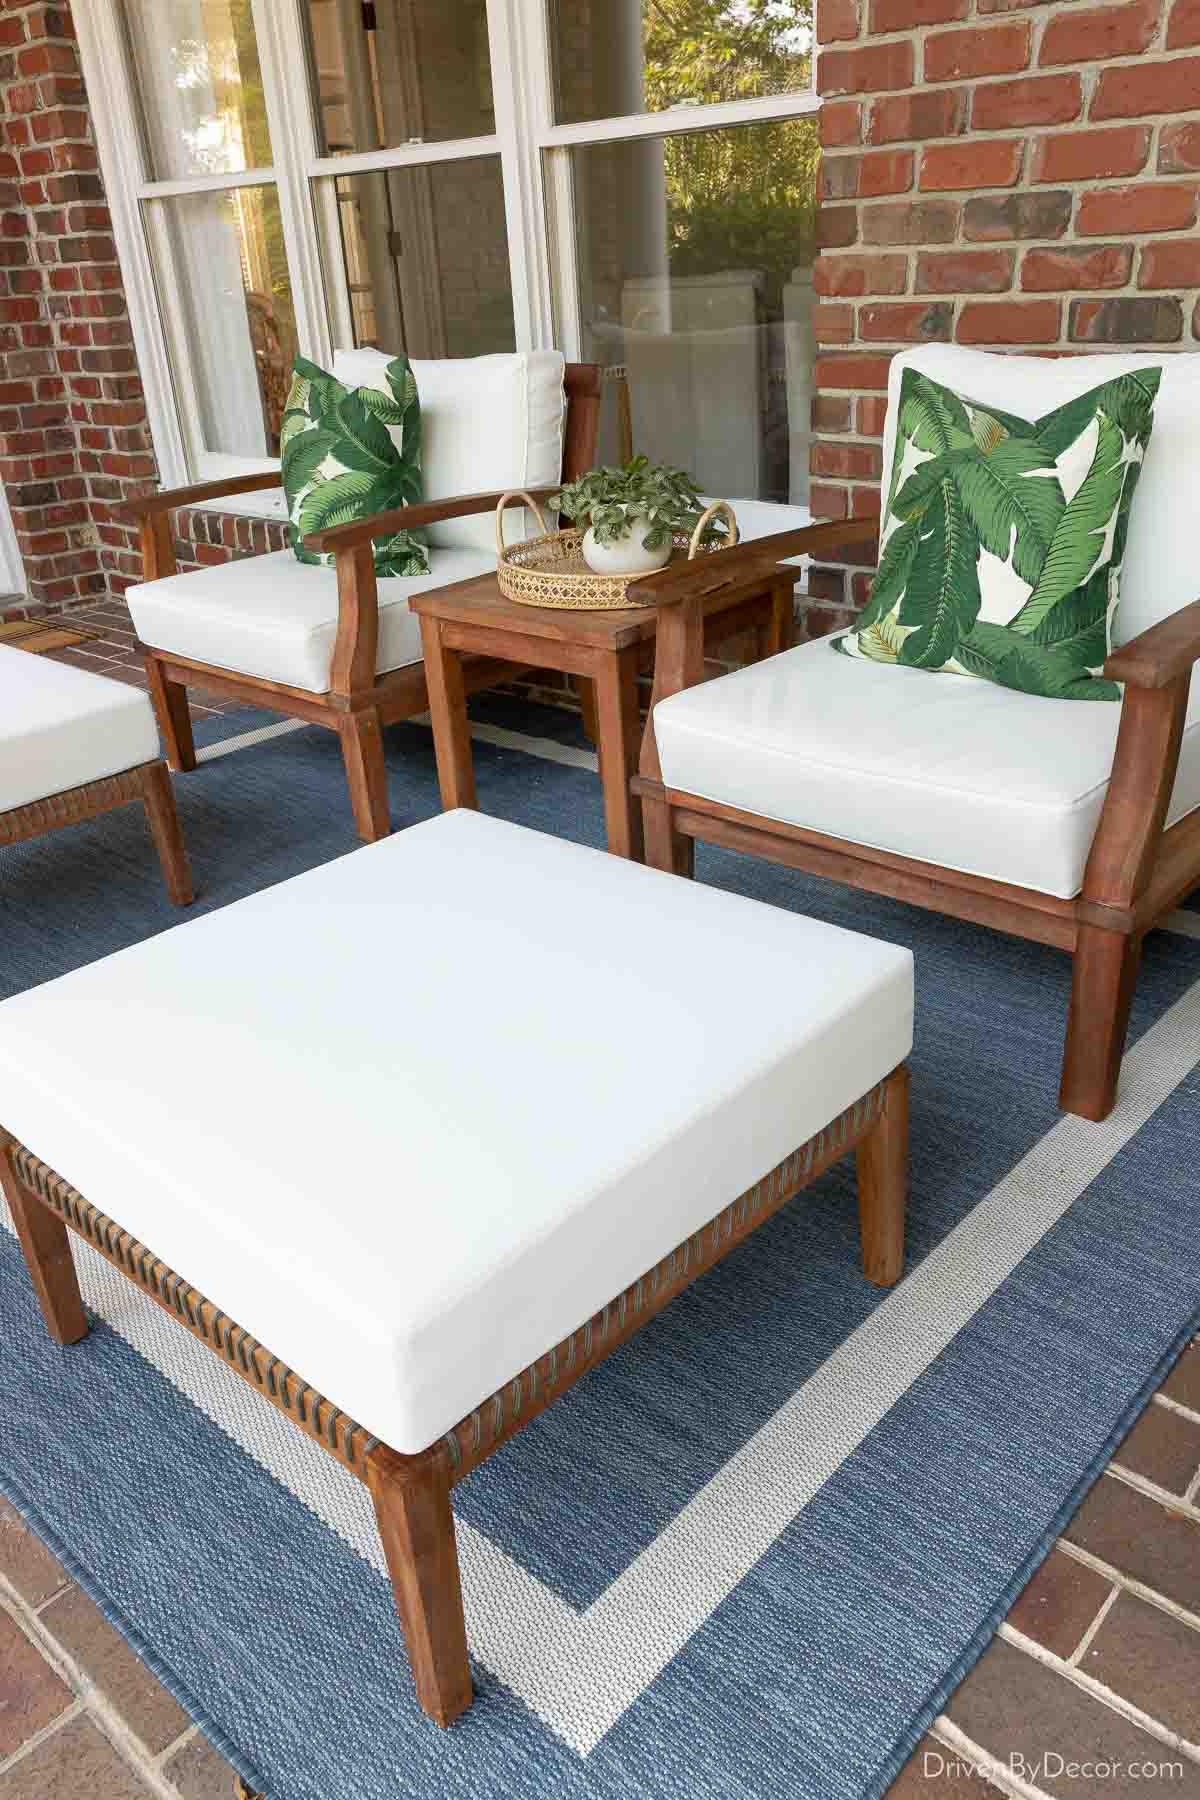 Outdoor lounge chairs with matching ottomans